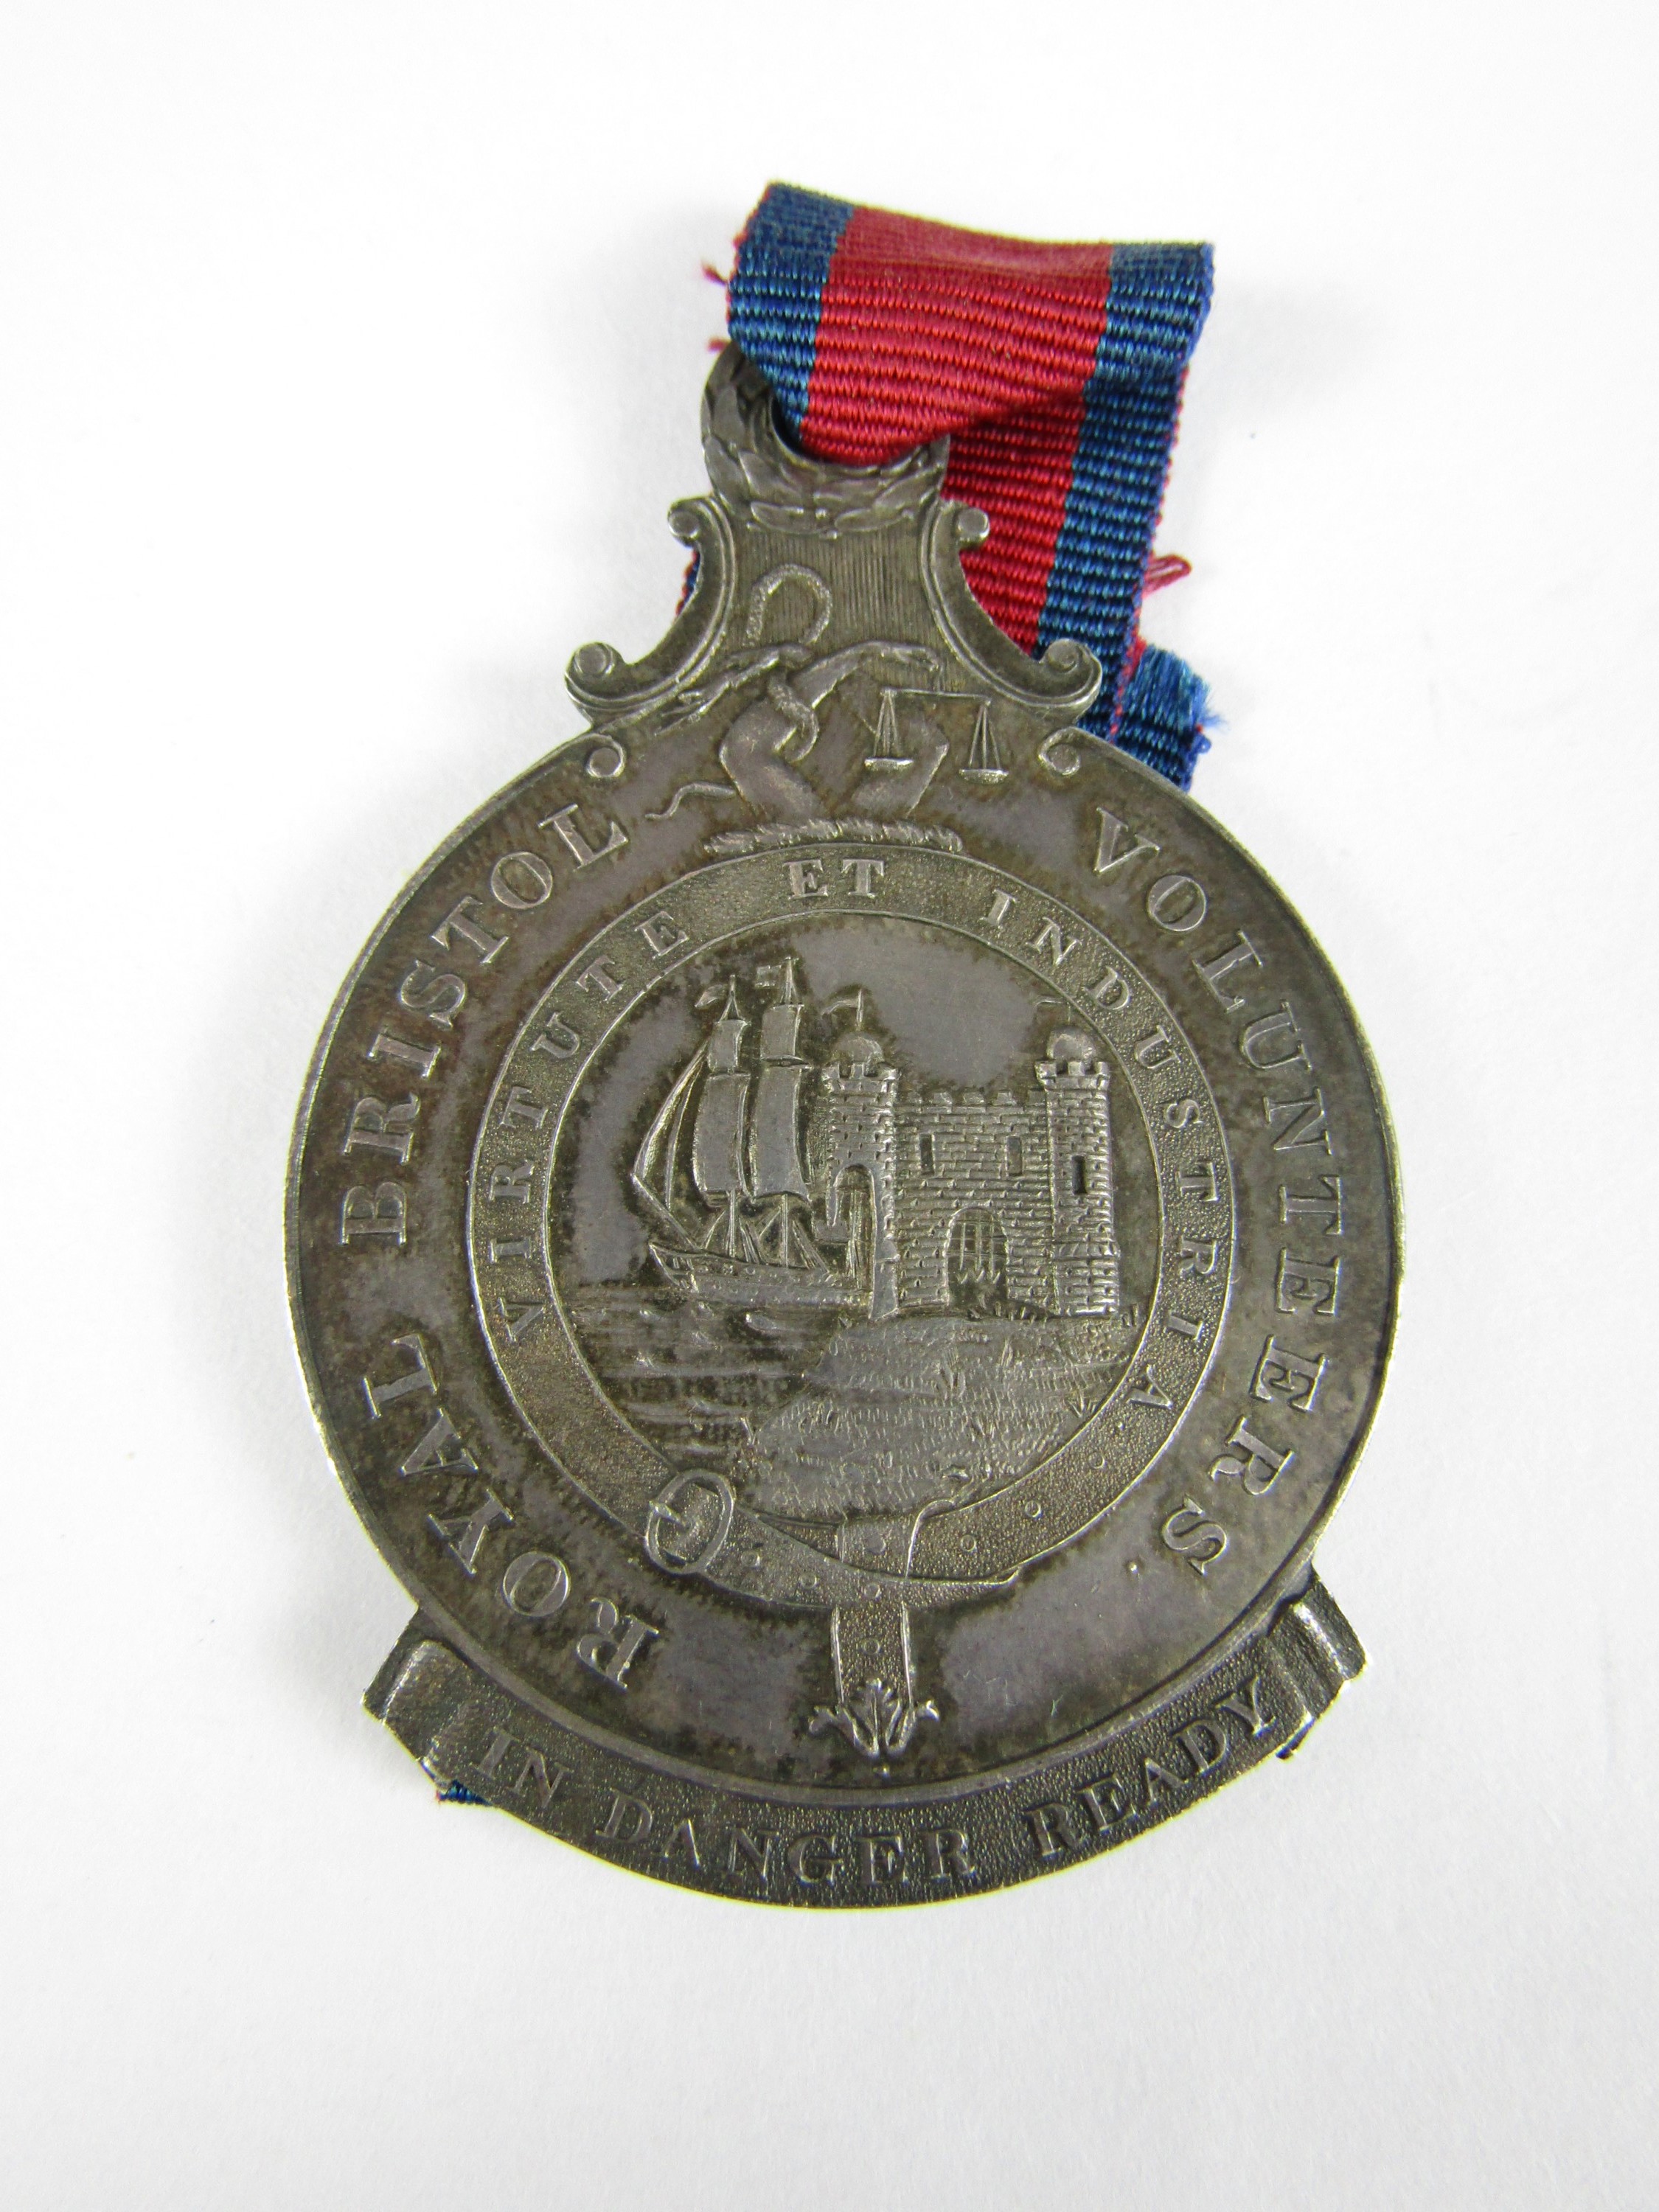 An 1814 Royal Bristol Volunteers medal, obverse the arms of the city of Bristol within an annulus